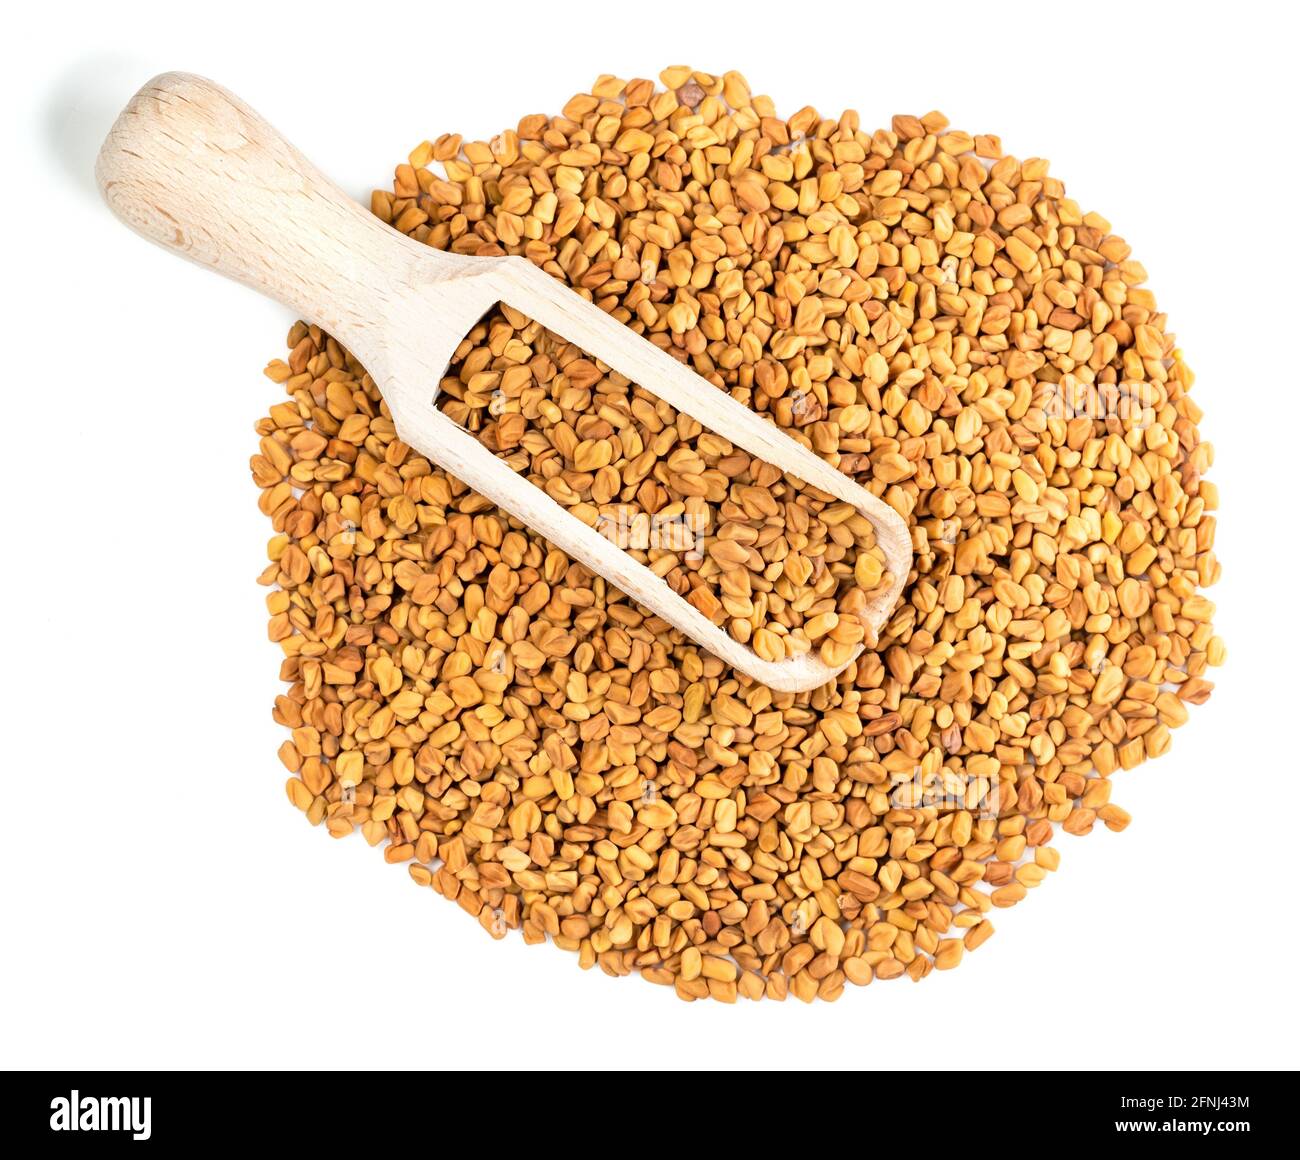 top view of wood scoop on pile of Fenugreek seeds on white background Stock Photo